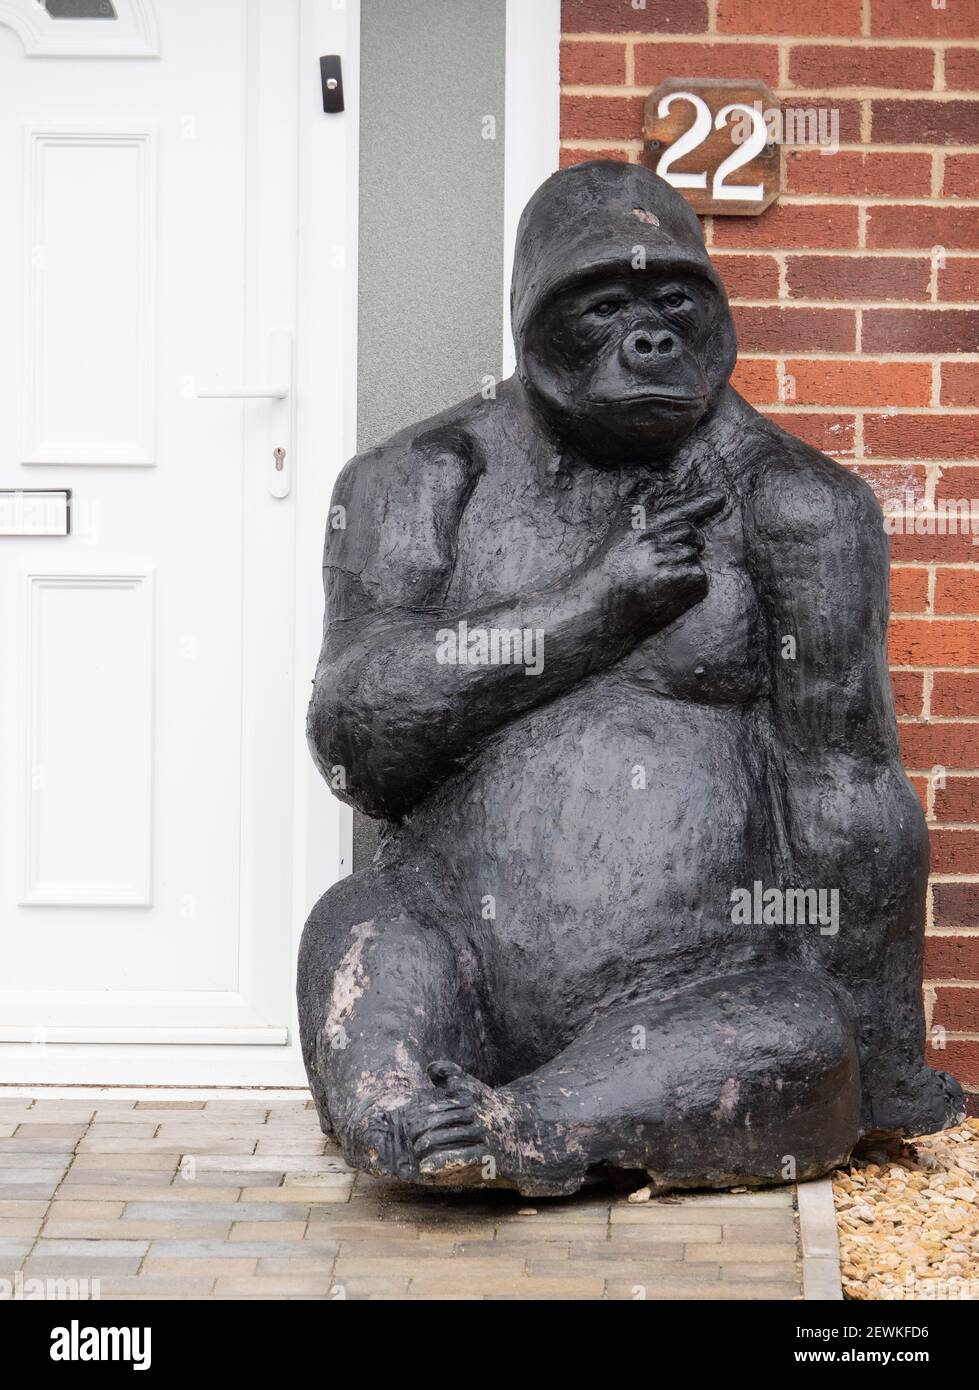 An unusual garden ornament of a life-size Gorilla sitting outside somebody's from door in Westbury, Wiltshire, England, UK. Stock Photo